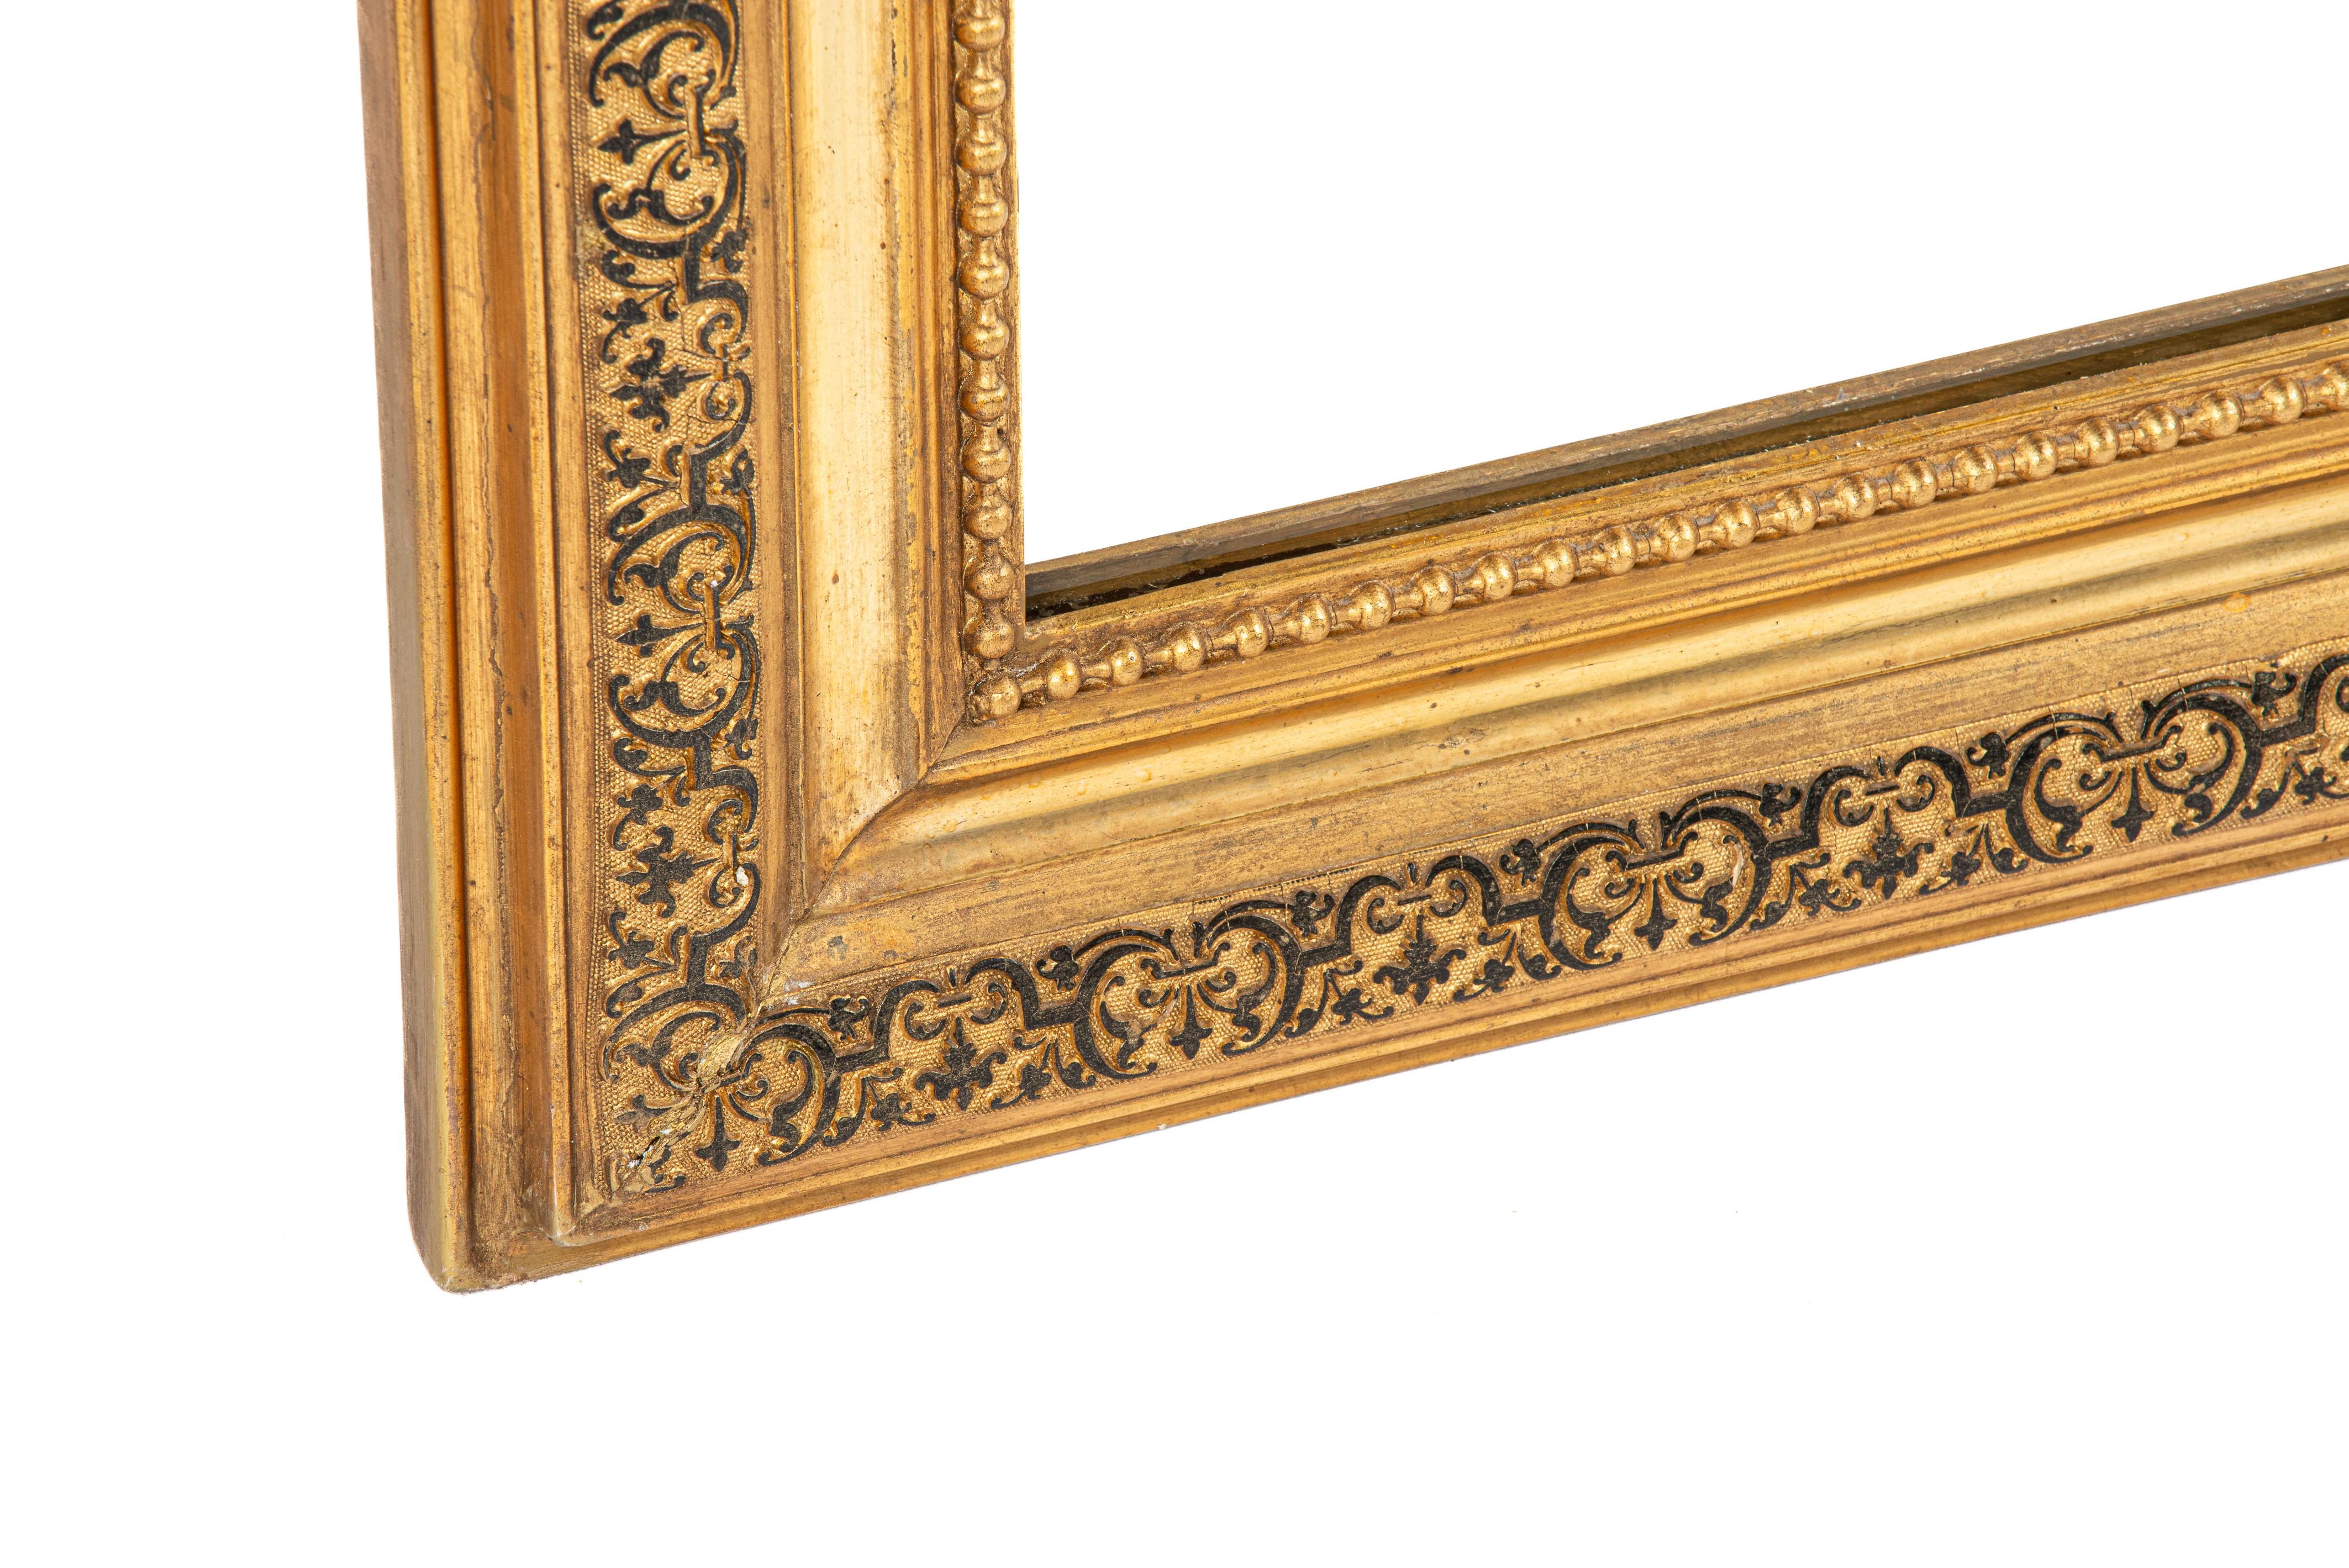 Presented here is an exquisite antique Louis Philippe mirror, adorned with 19th-century French craftsmanship and elegance. Originating from southern France and dating back to approximately 1880, this mirror showcases the distinct characteristics of